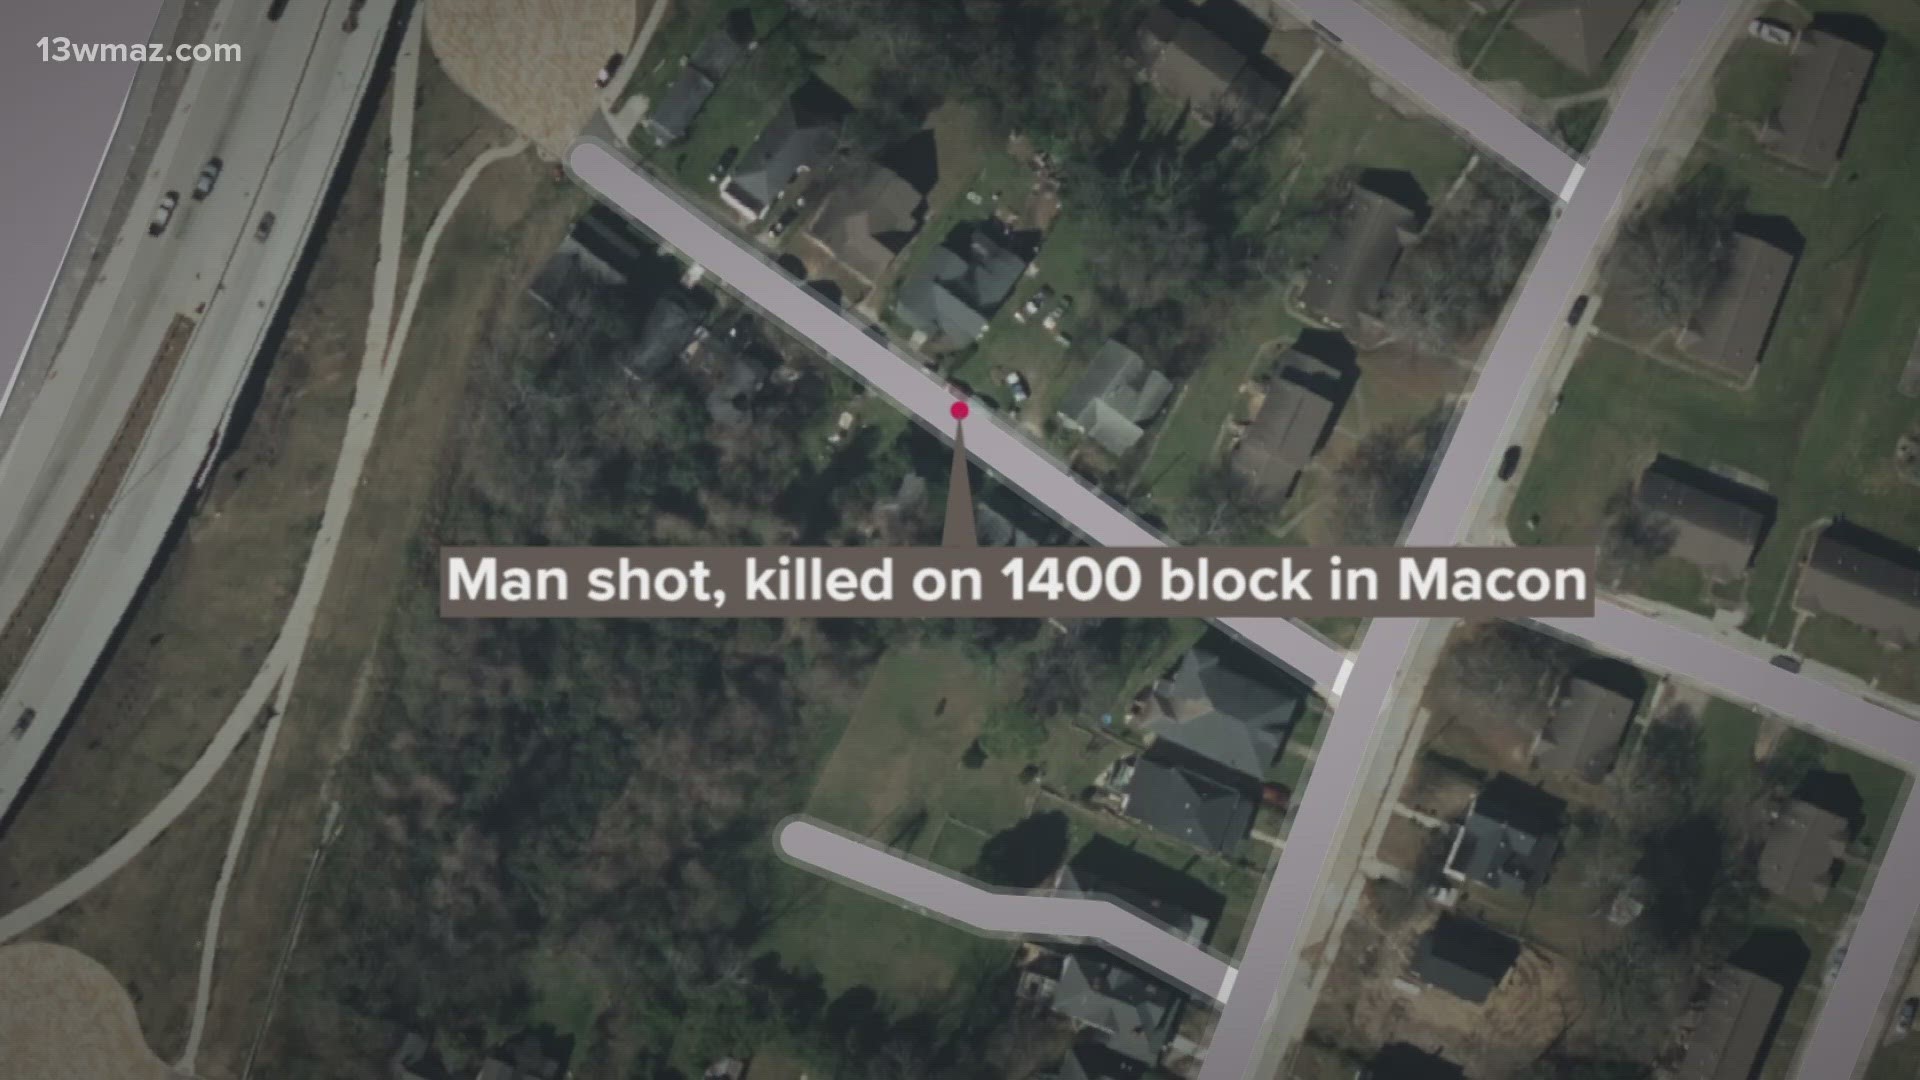 The Bibb County sheriff's office says it happened Saturday after 7 a.m. in Macon.